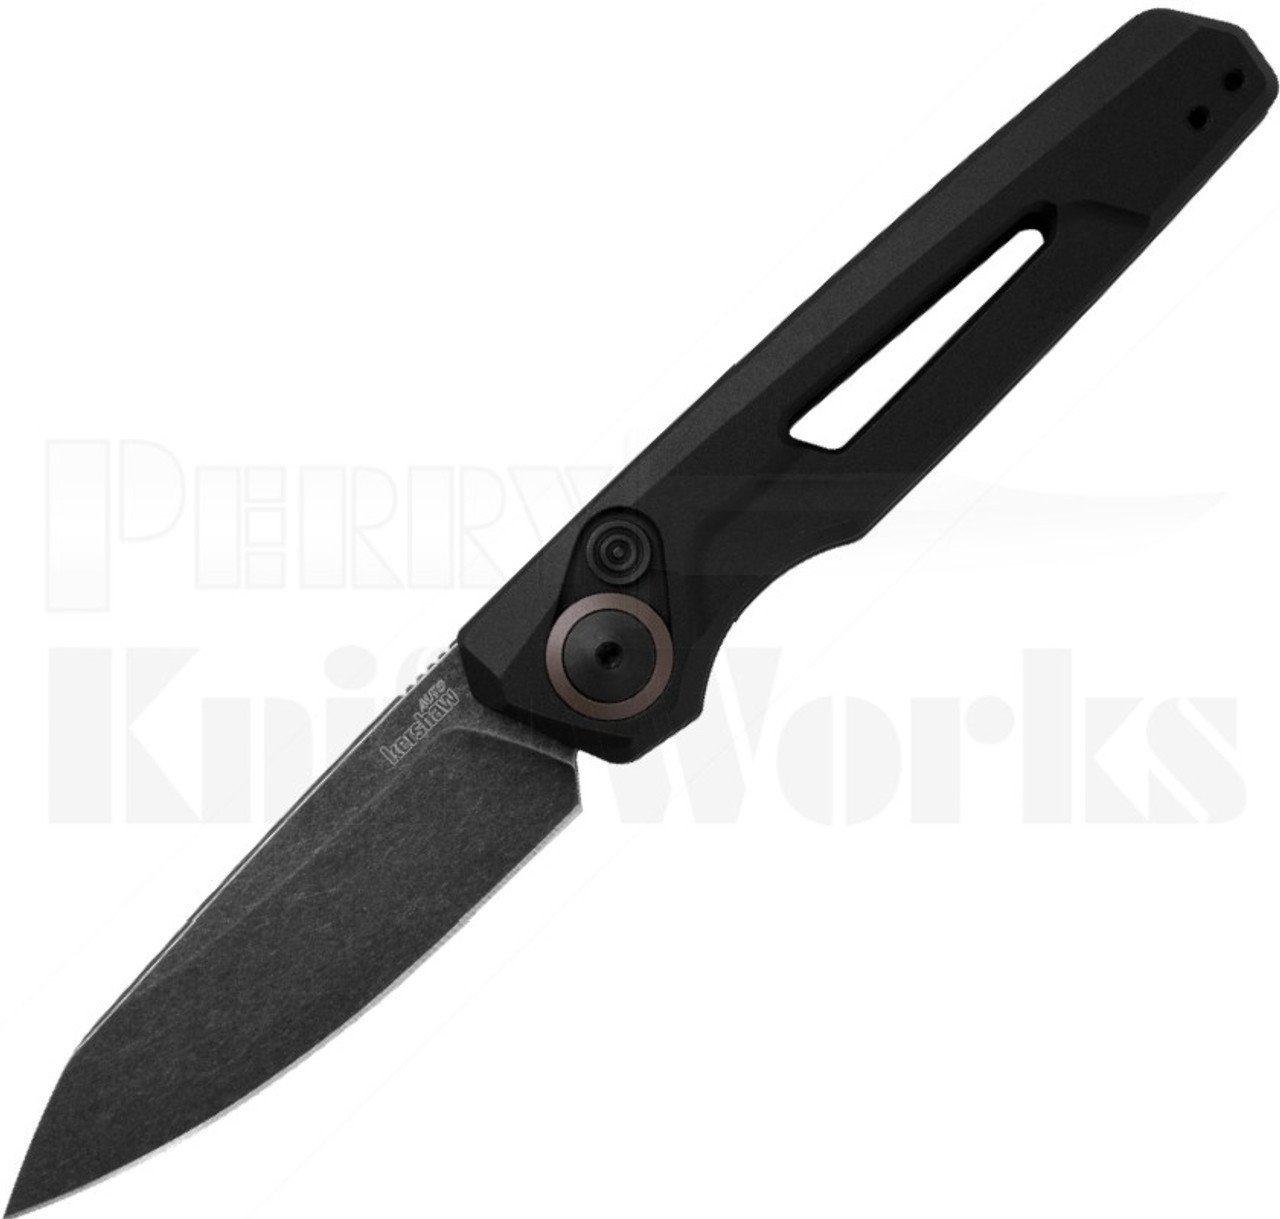 Kershaw Launch 11 Automatic Knife Black 7550